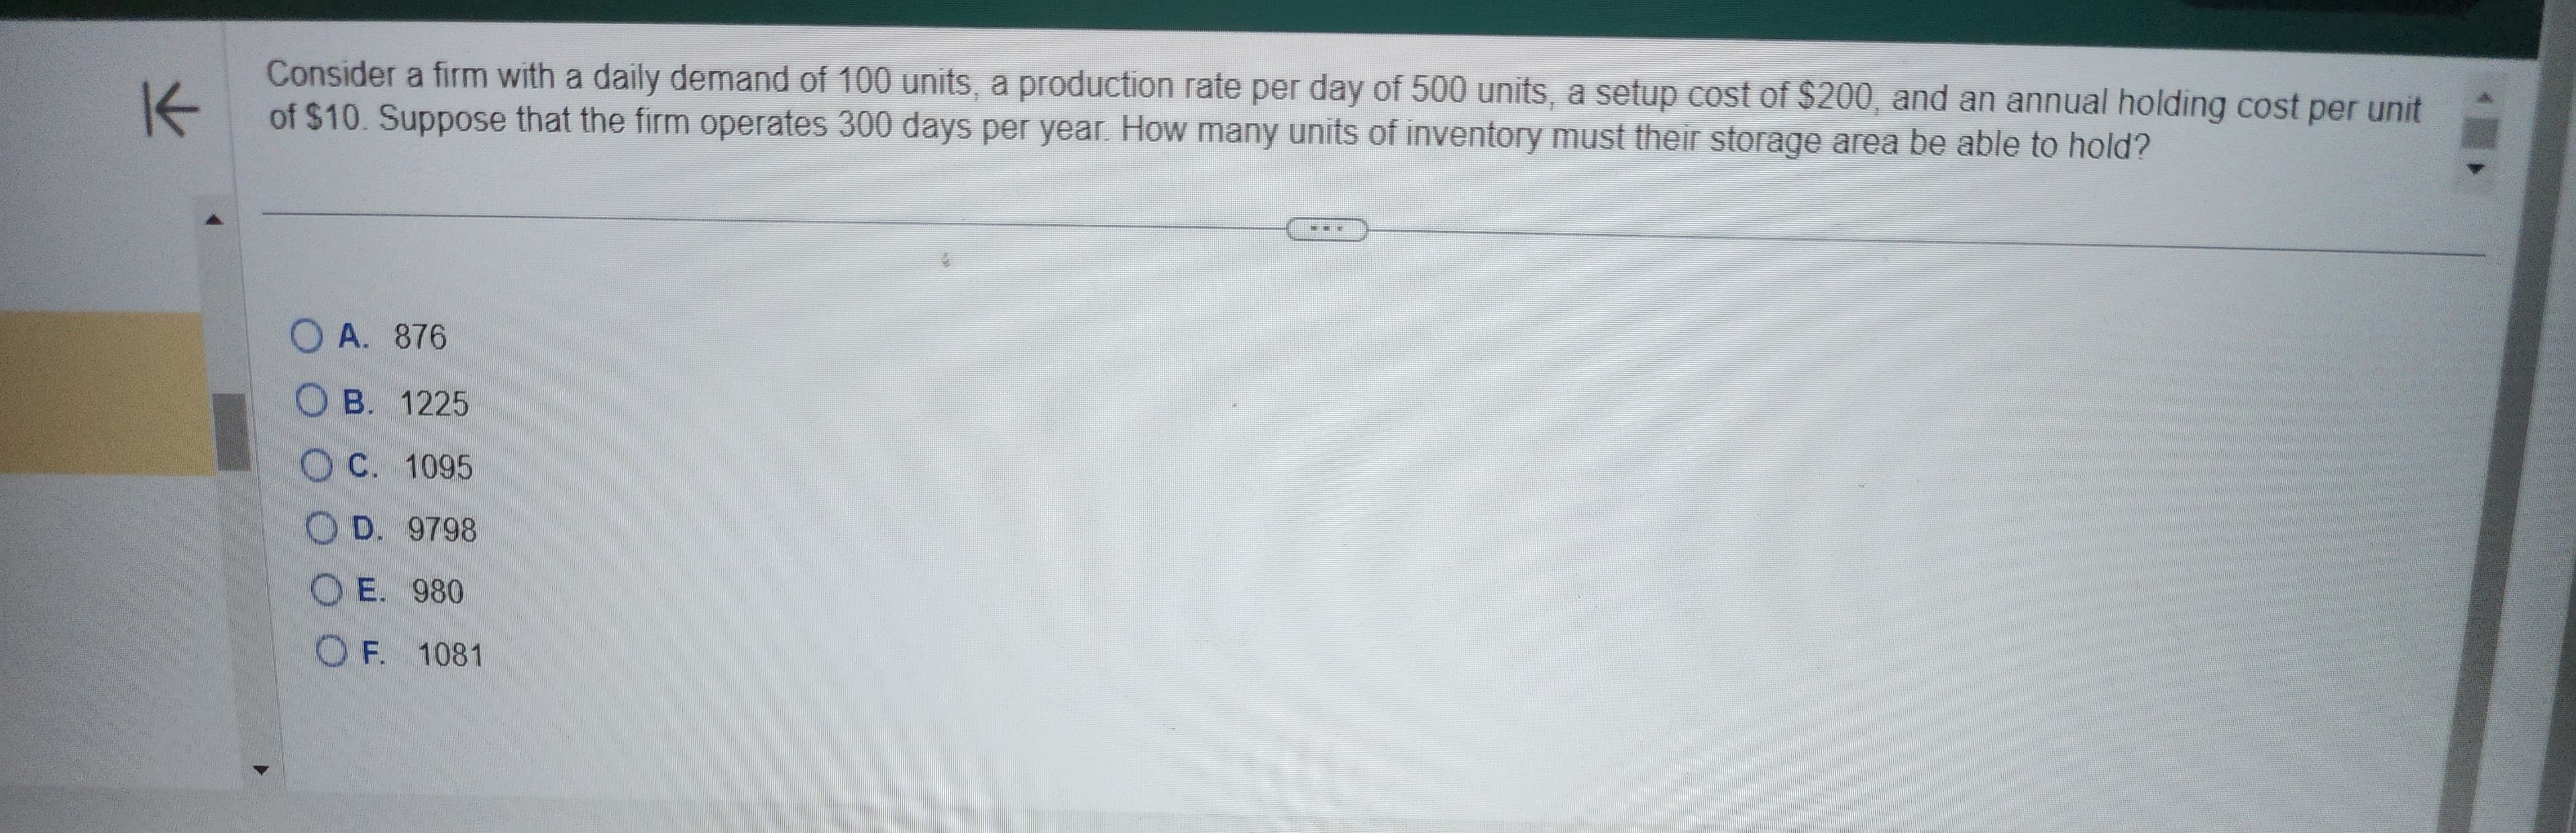 K
Consider a firm with a daily demand of 100 units, a production rate per day of 500 units, a setup cost of $200, and an annual holding cost per unit
of $10. Suppose that the firm operates 300 days per year. How many units of inventory must their storage area be able to hold?
OA. 876
OB. 1225
C. 1095
OD. 9798
OE. 980
OF. 1081